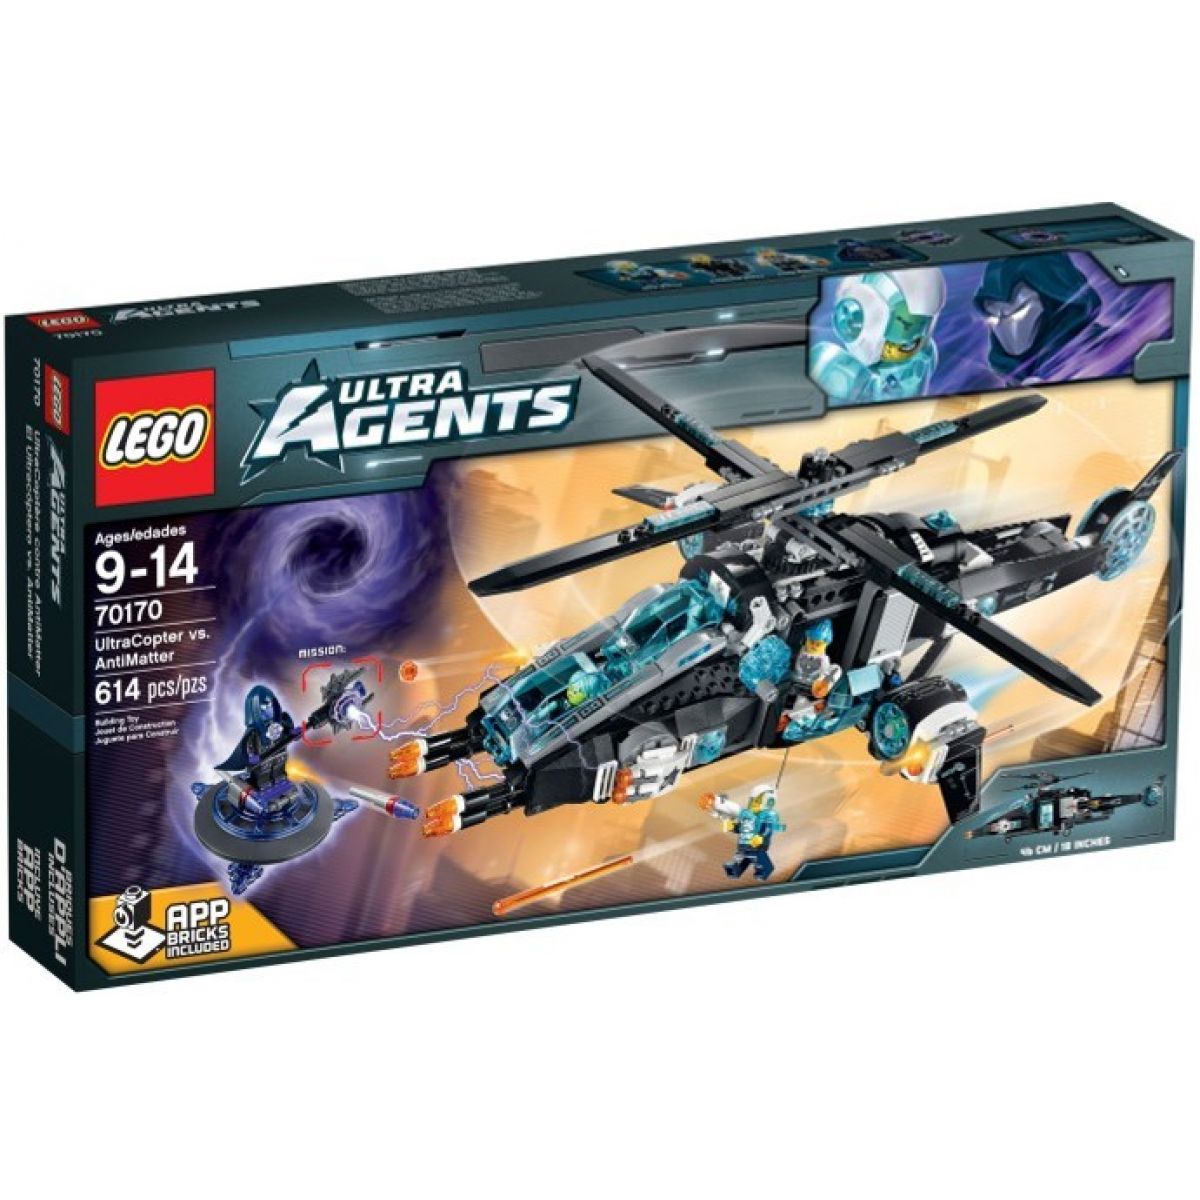 LEGO Agents 70170 - UltraCopter vs. AntiMatter